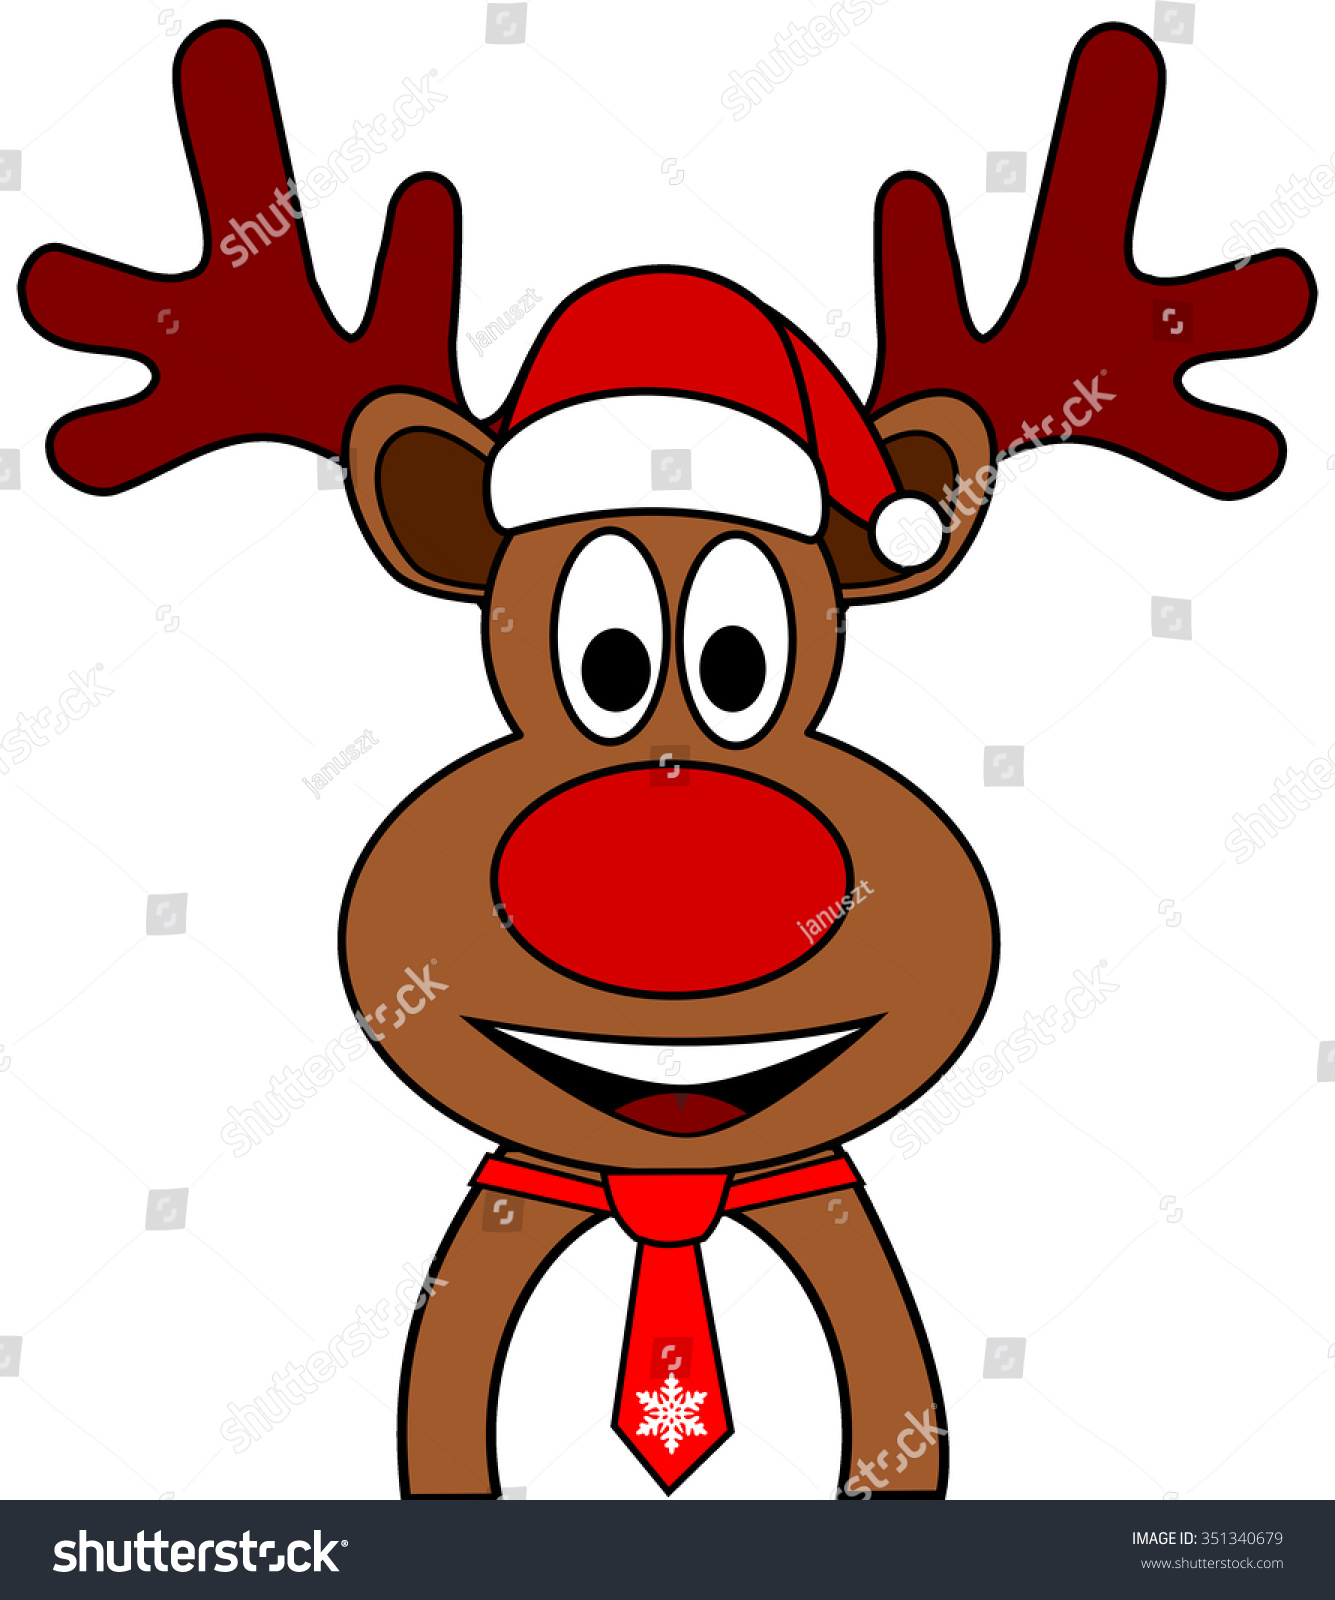 Christmas Reindeer with red nose